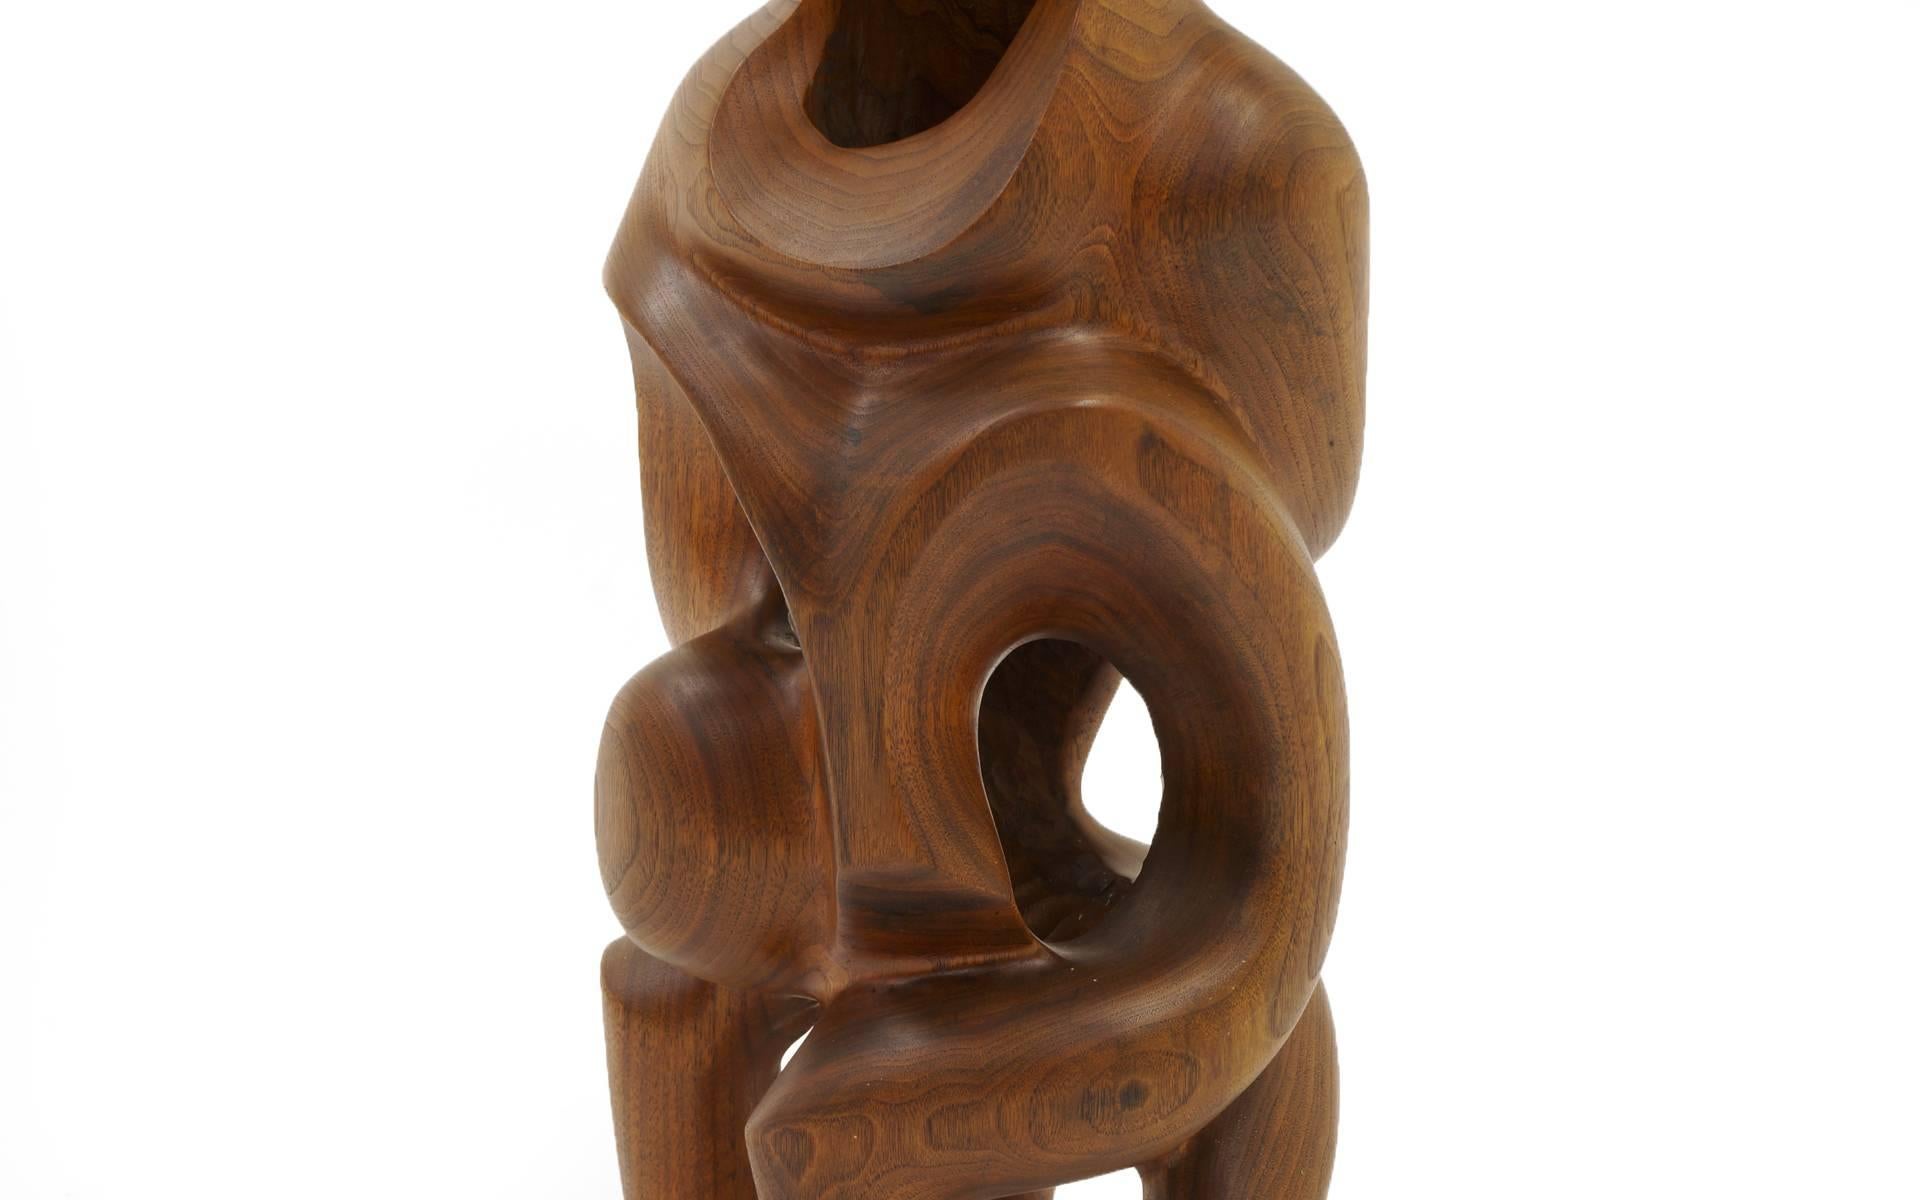 American Walnut Tabletop Sculpture by Cecil C. Carstenson, 1950